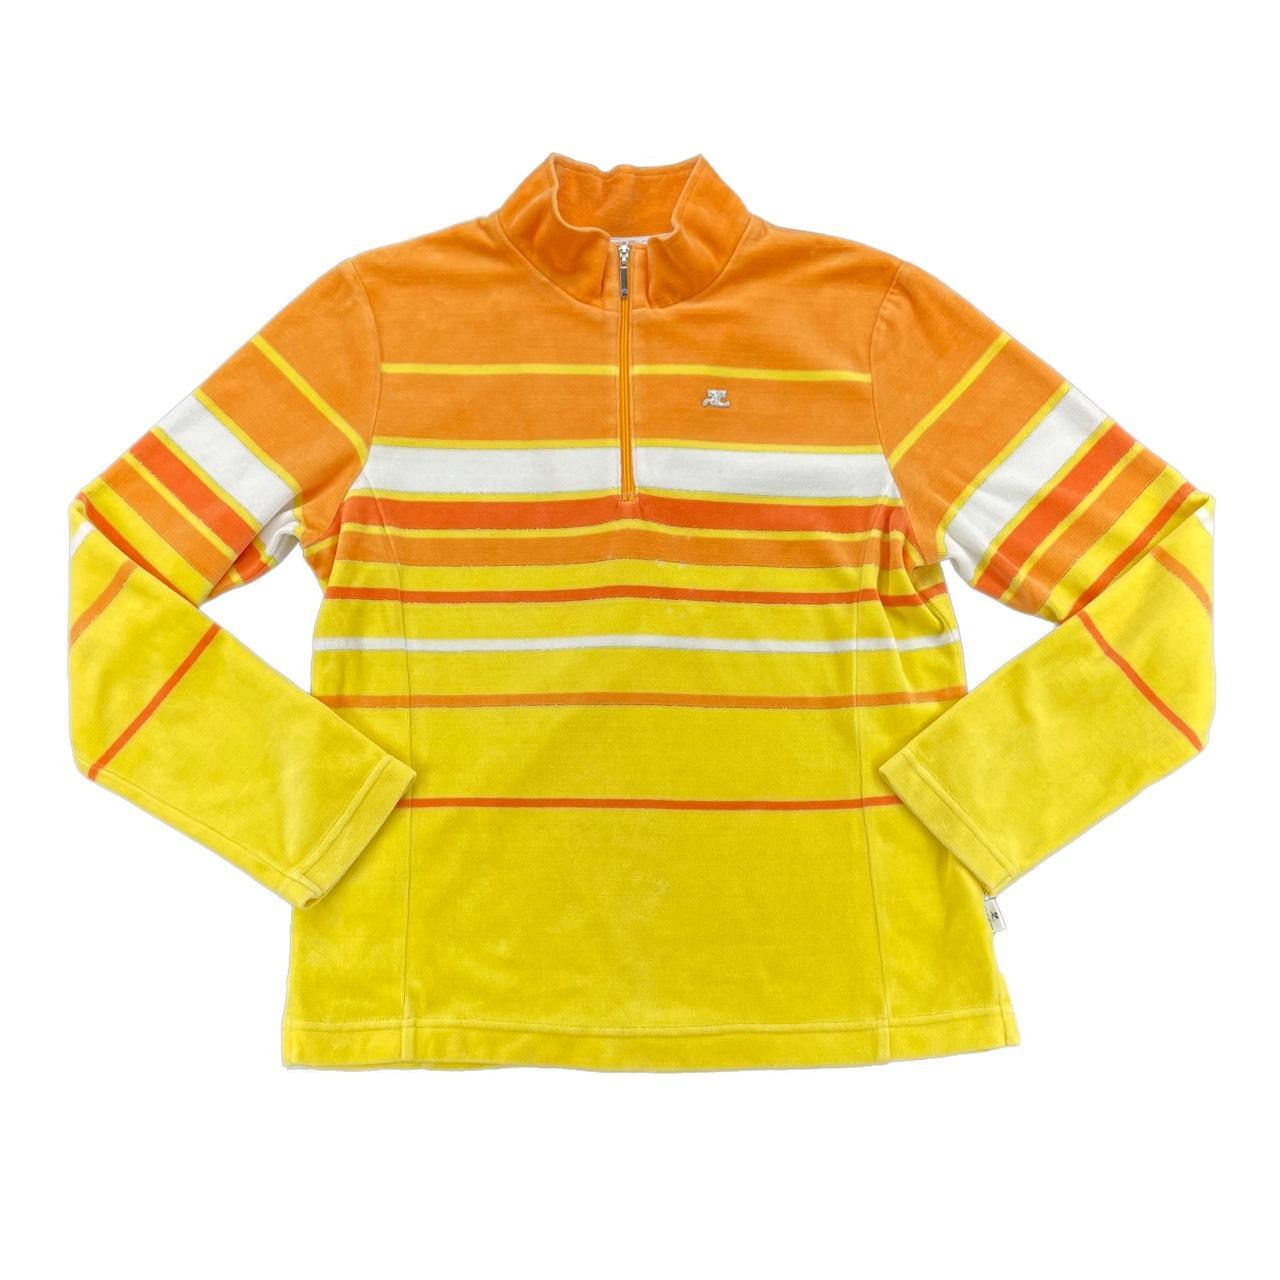 Courrèges Women's Orange and Yellow Top